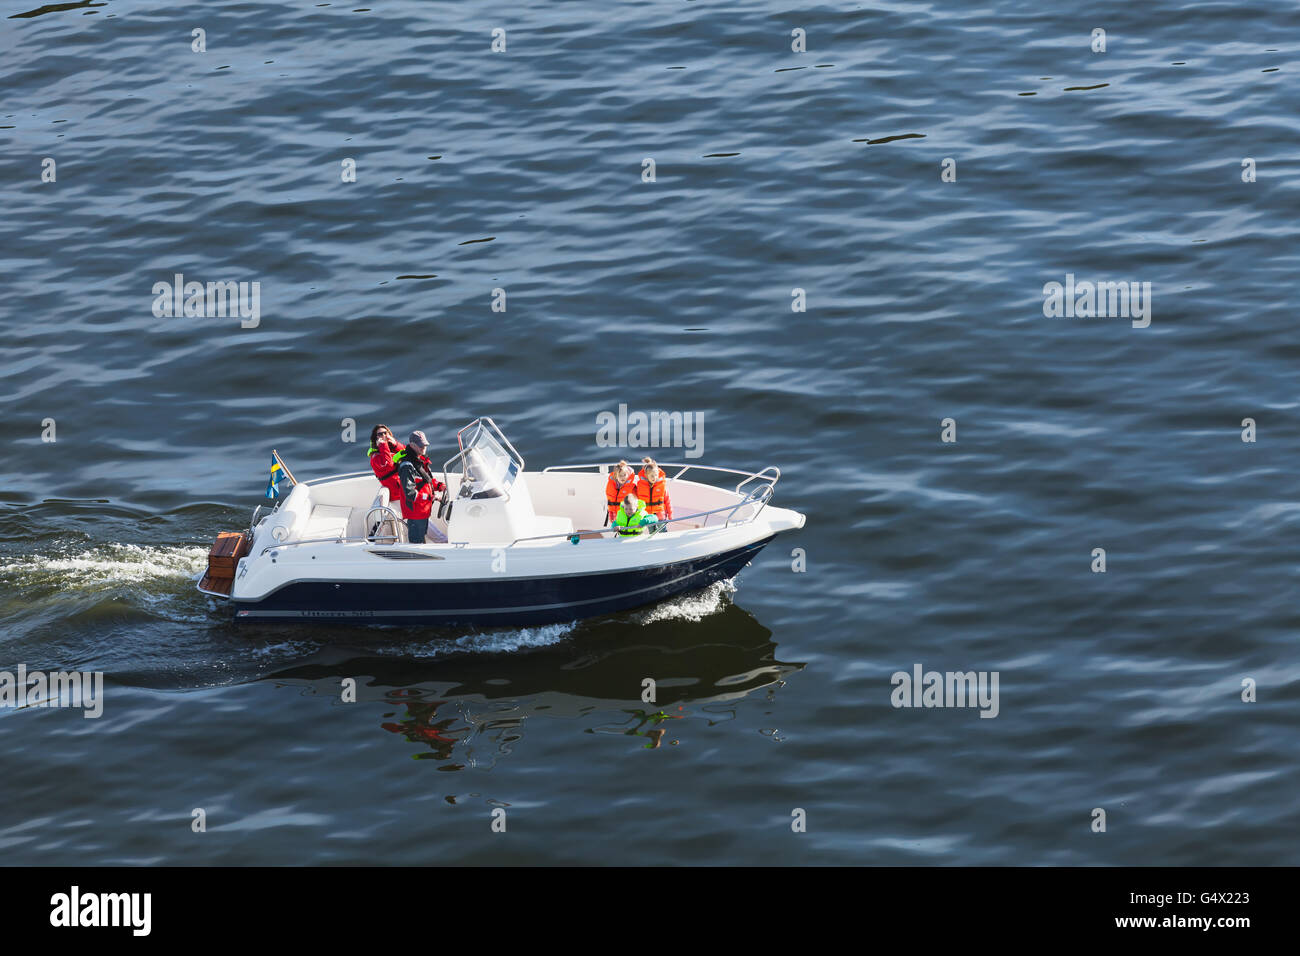 Vaxholm, Sweden - May 6, 2016: Ordinary Swedish family does a boat trip on a small motorboat Stock Photo